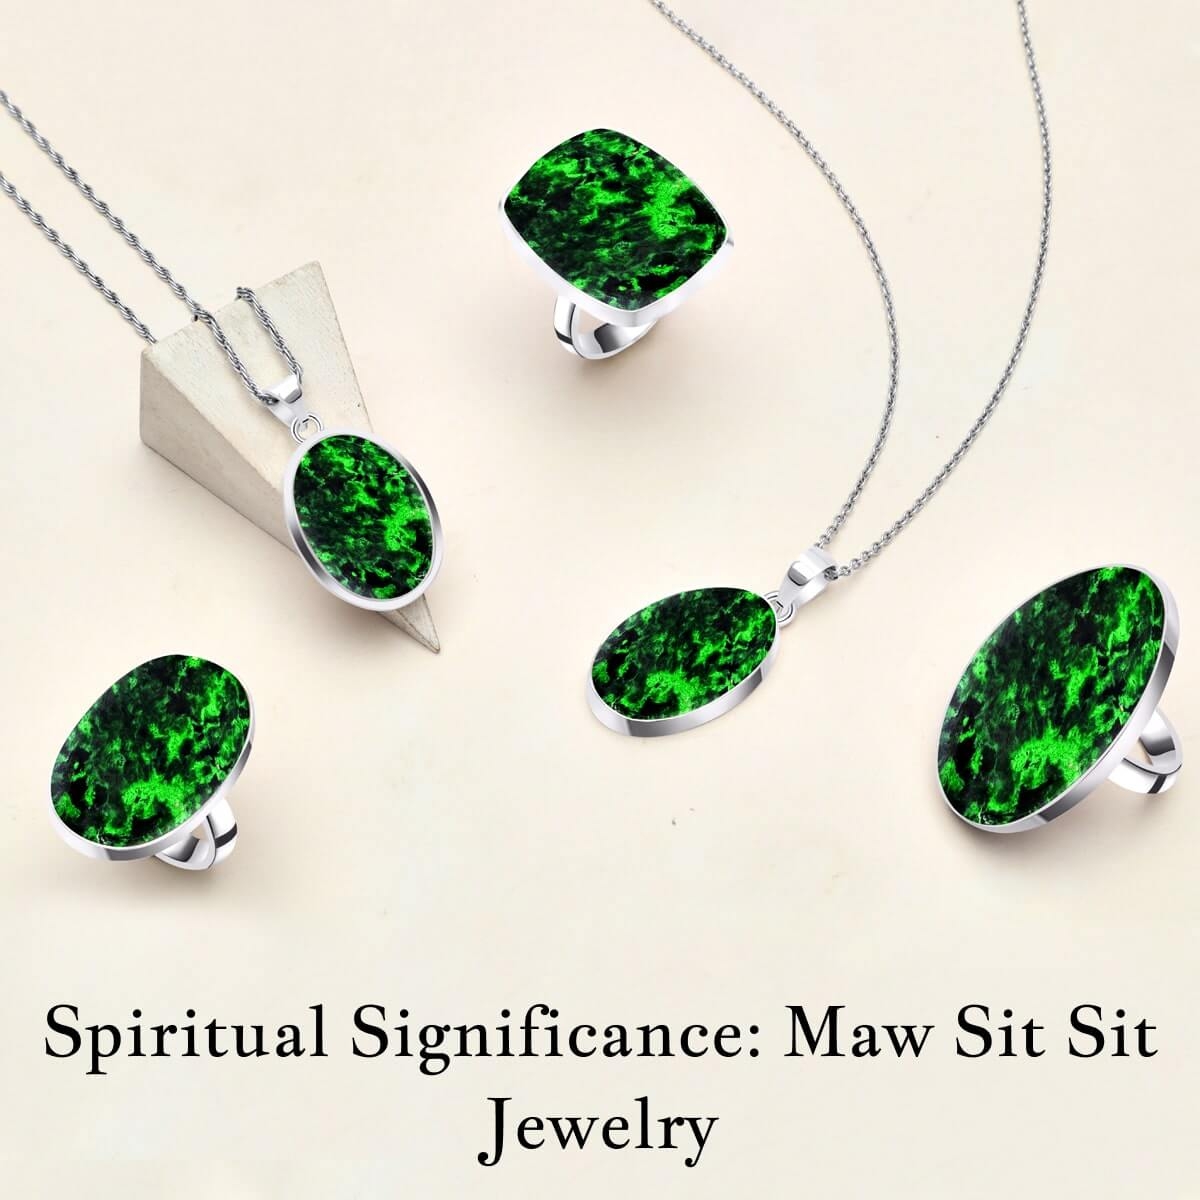 Beliefs Associated With Maw Sit Sit Sterling Silver Jewelry